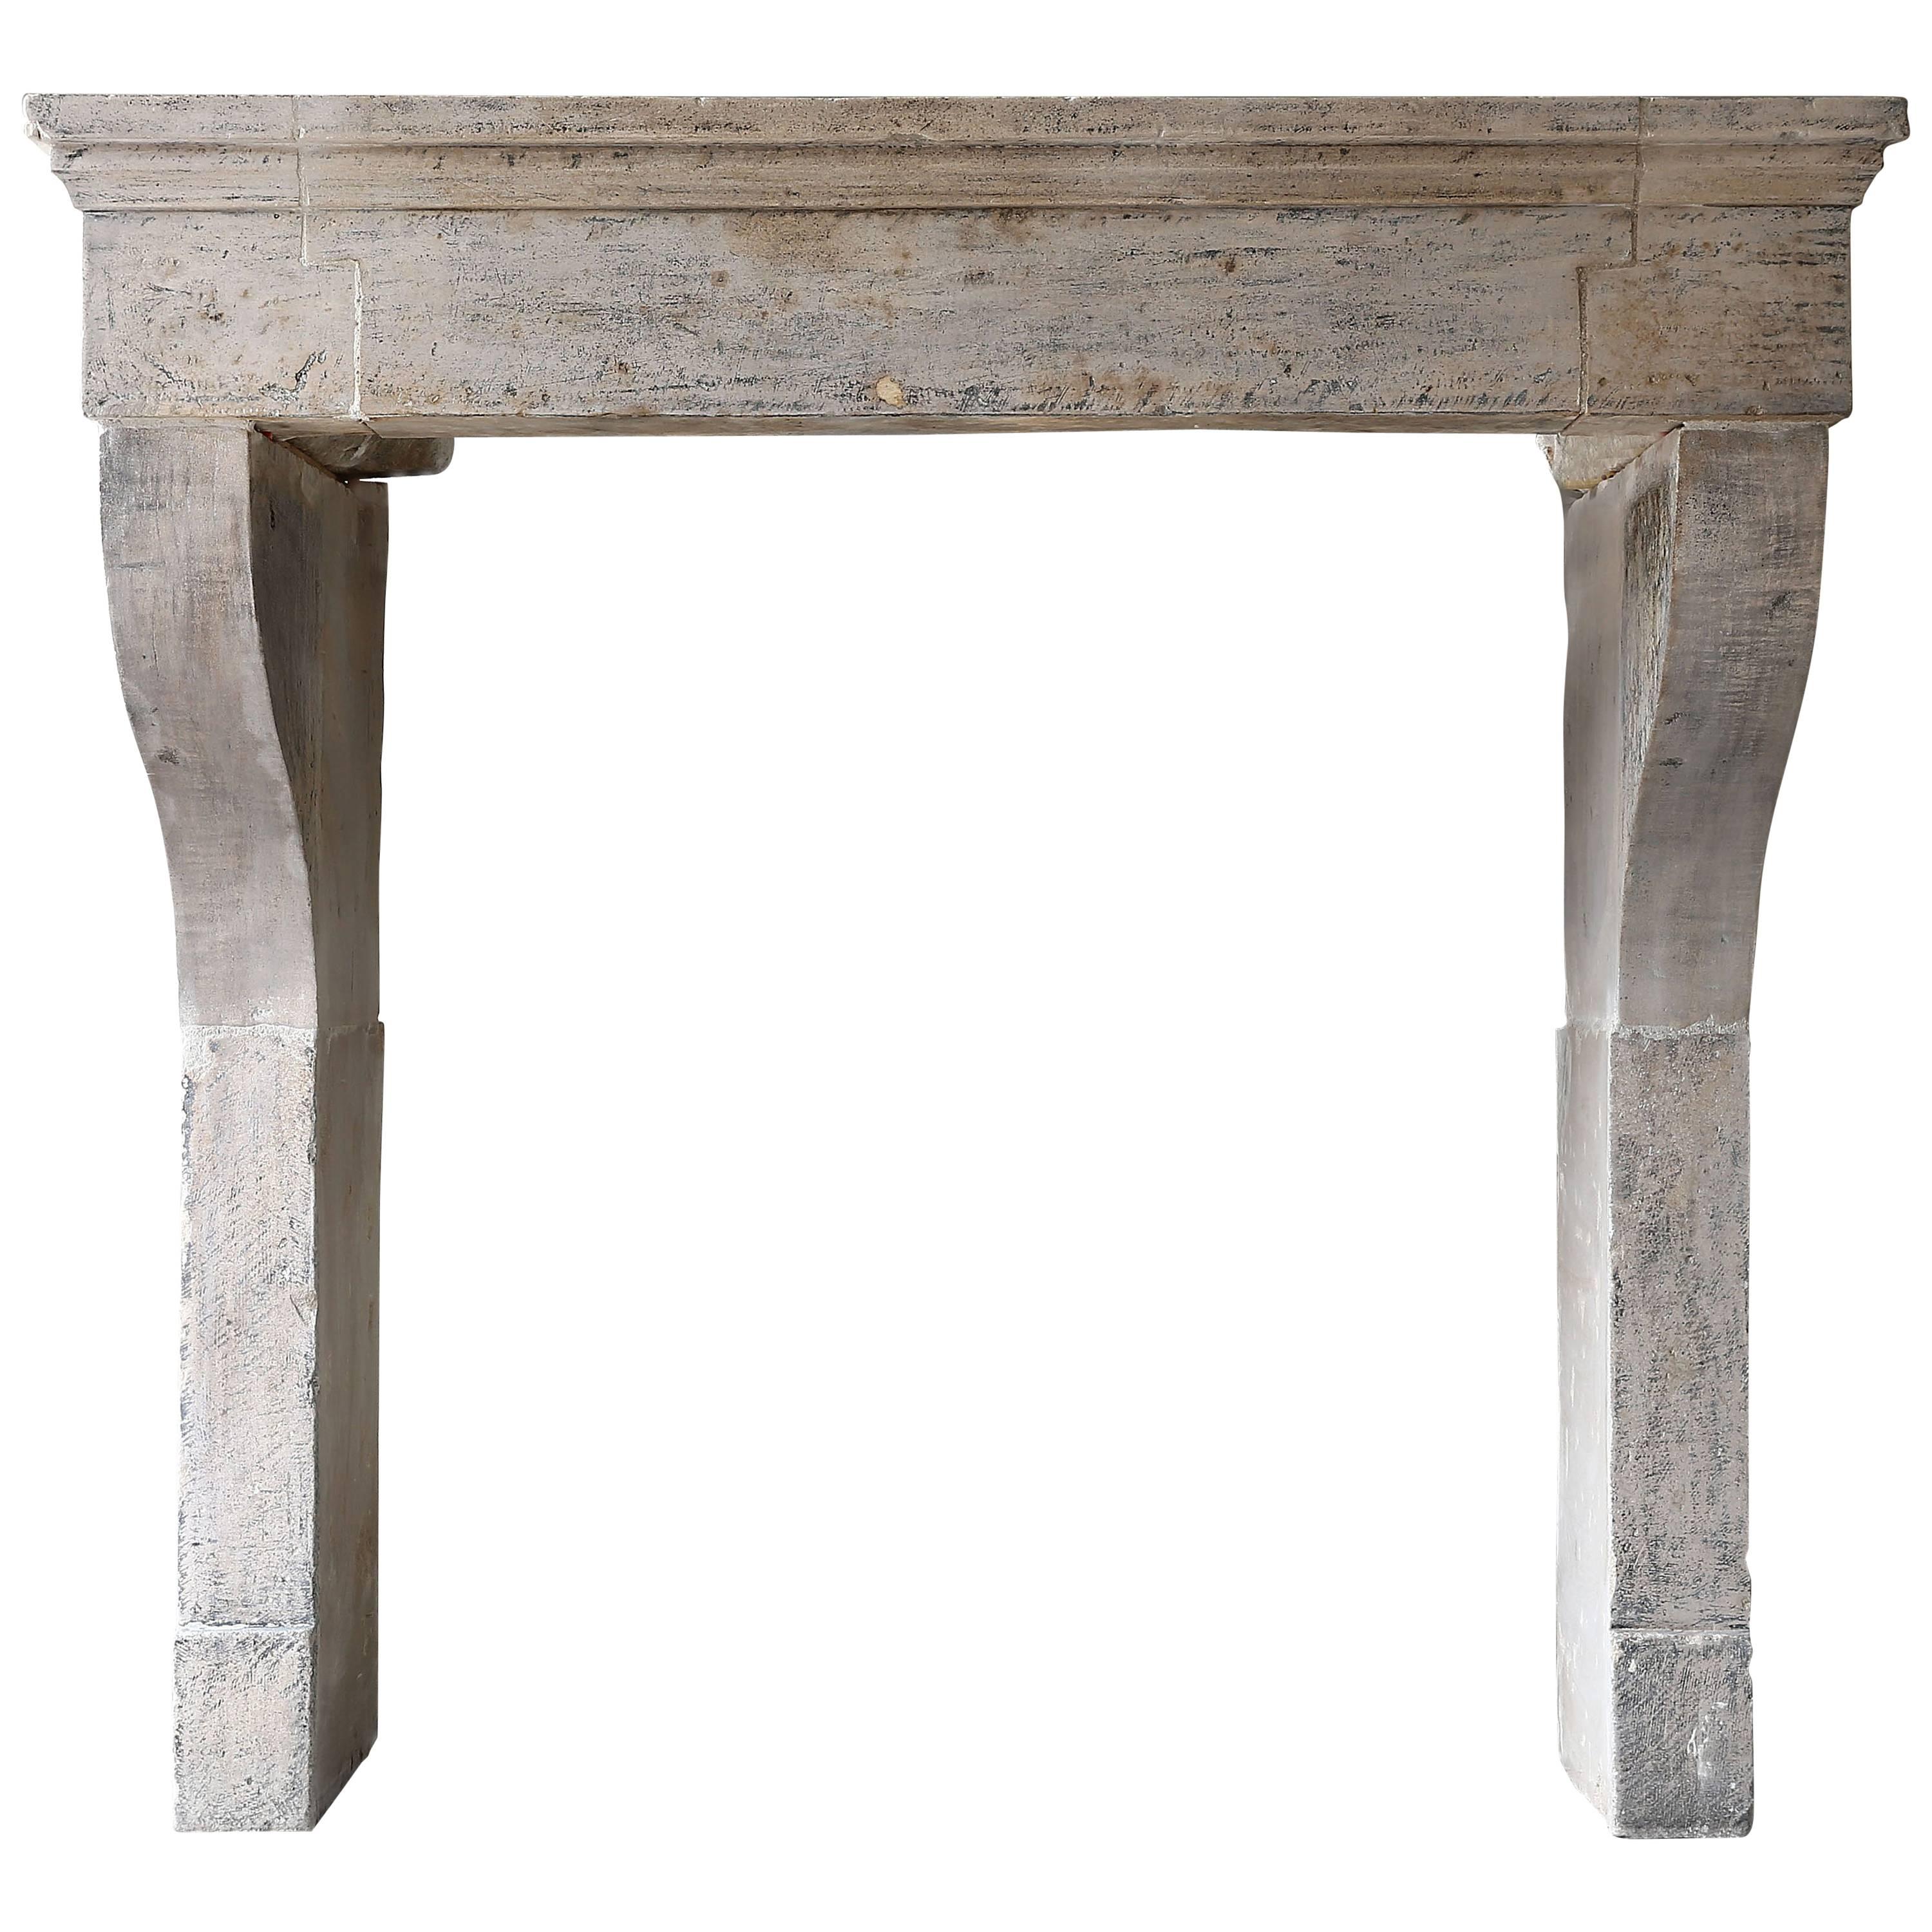 Antique Fireplace of French Limestone in Campagnarde Style